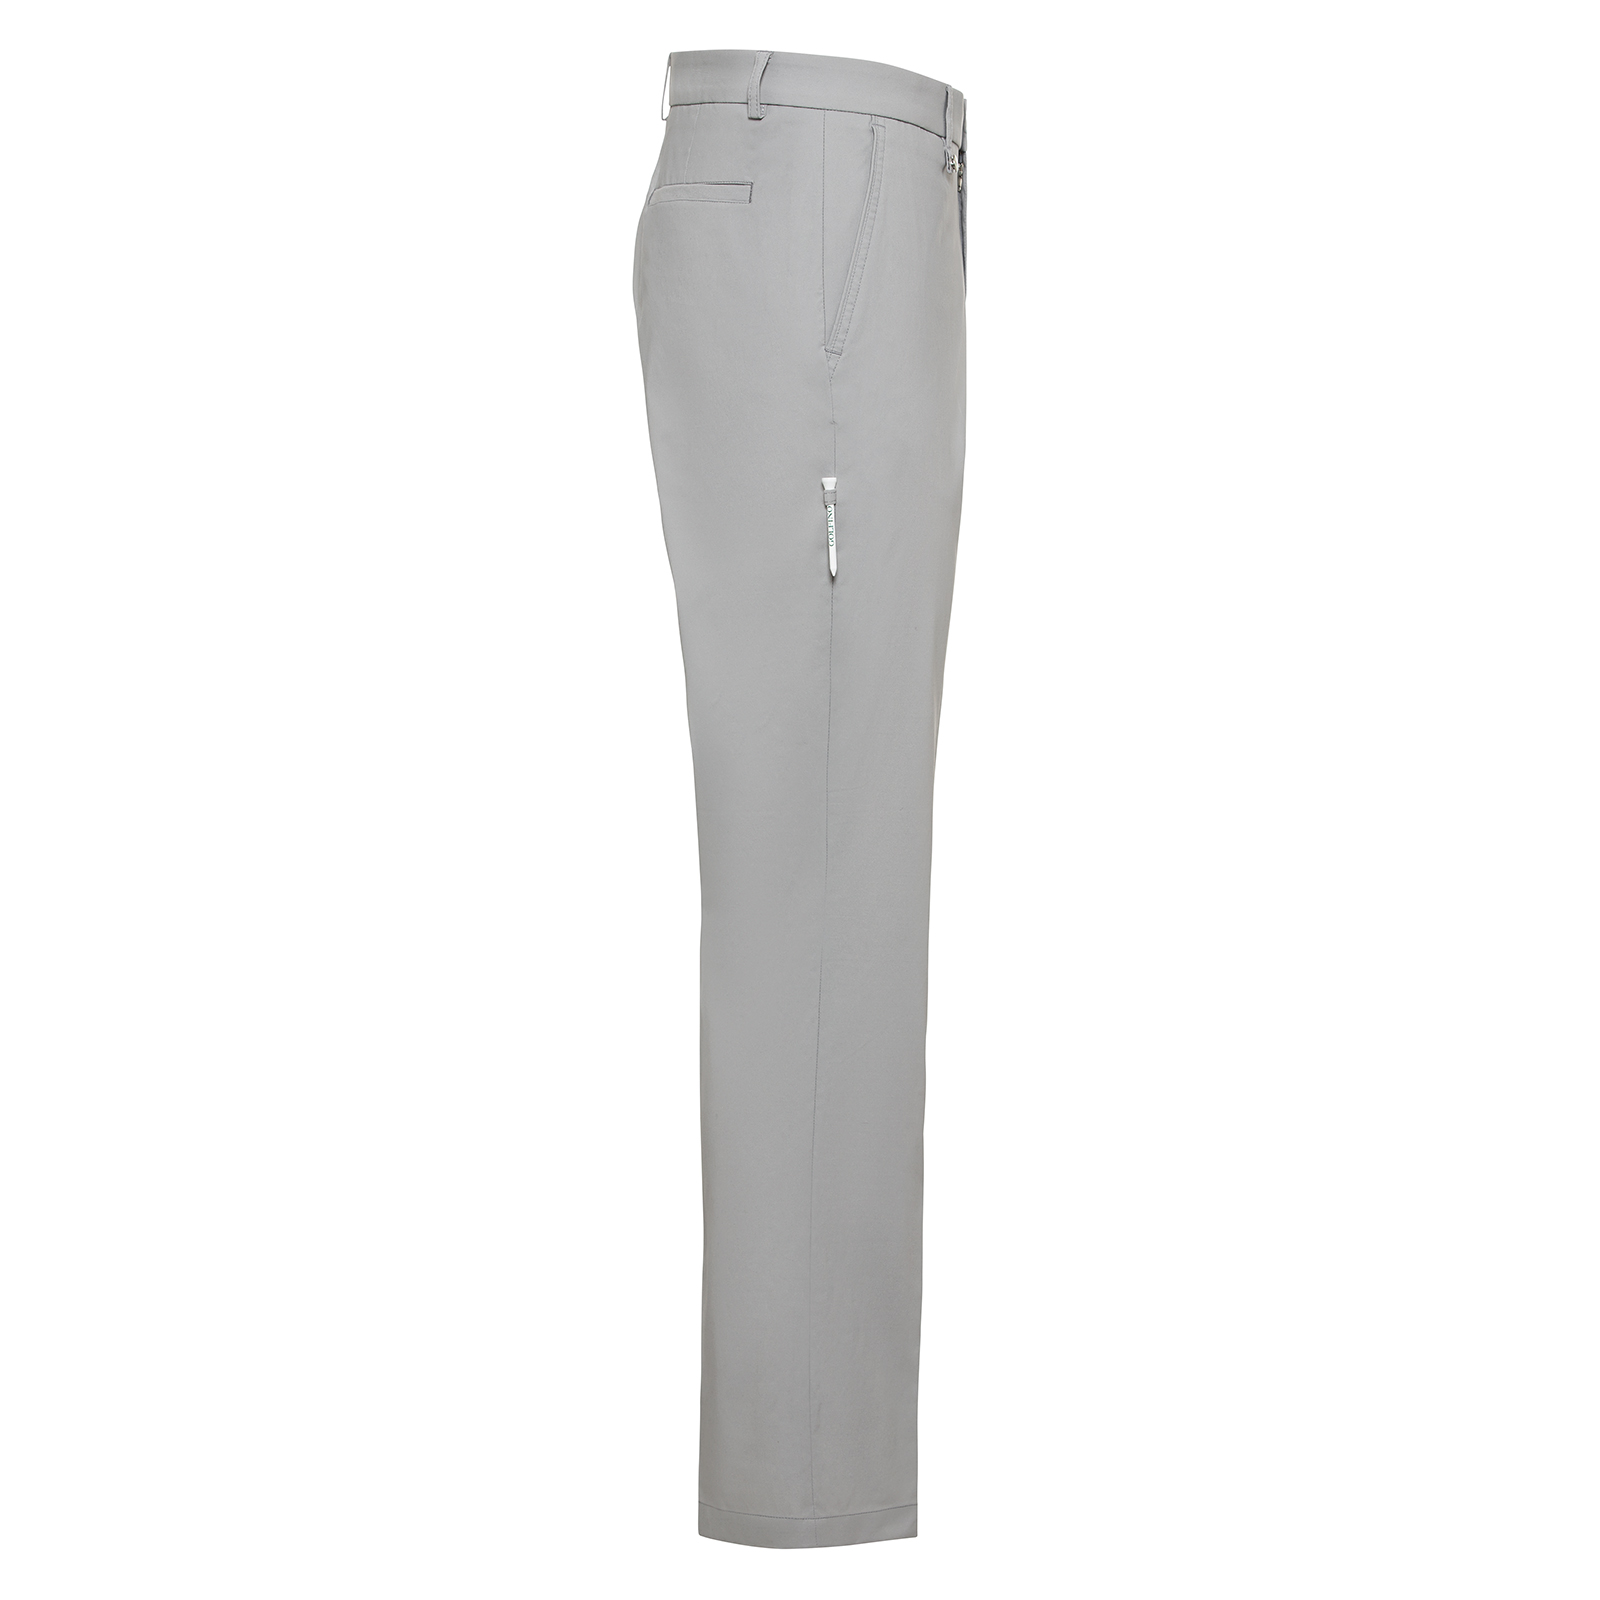 Men's practical and versatile golf trousers